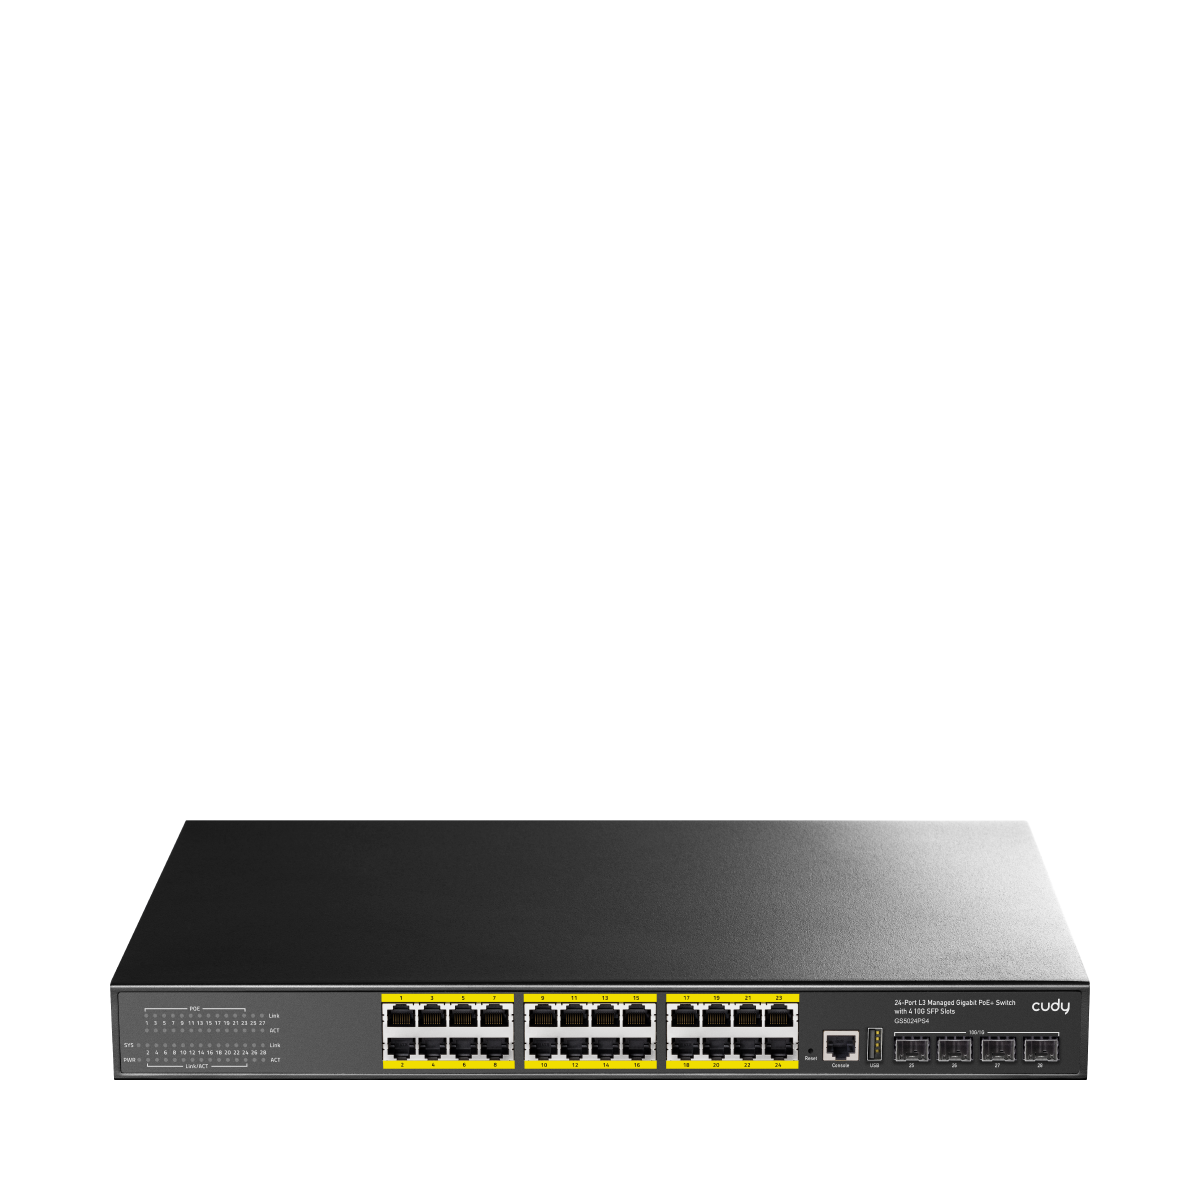 24-GbE PoE L3 Managed Switch with 4-SFP+, GS5024PS4 1.0